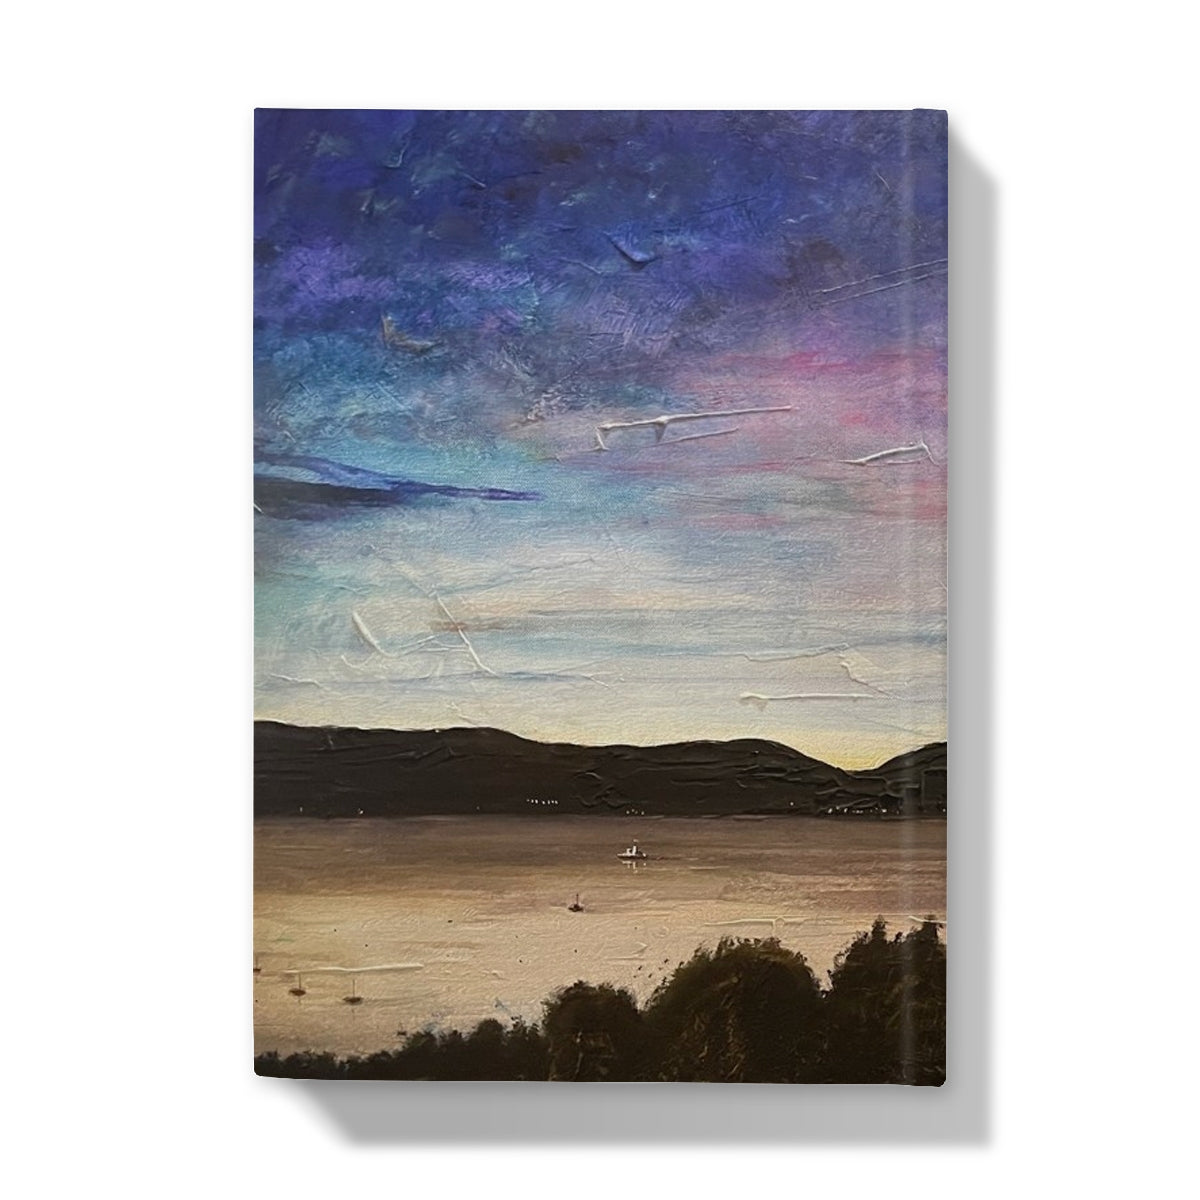 River Clyde Twilight Art Gifts Hardback Journal-Journals & Notebooks-River Clyde Art Gallery-Paintings, Prints, Homeware, Art Gifts From Scotland By Scottish Artist Kevin Hunter